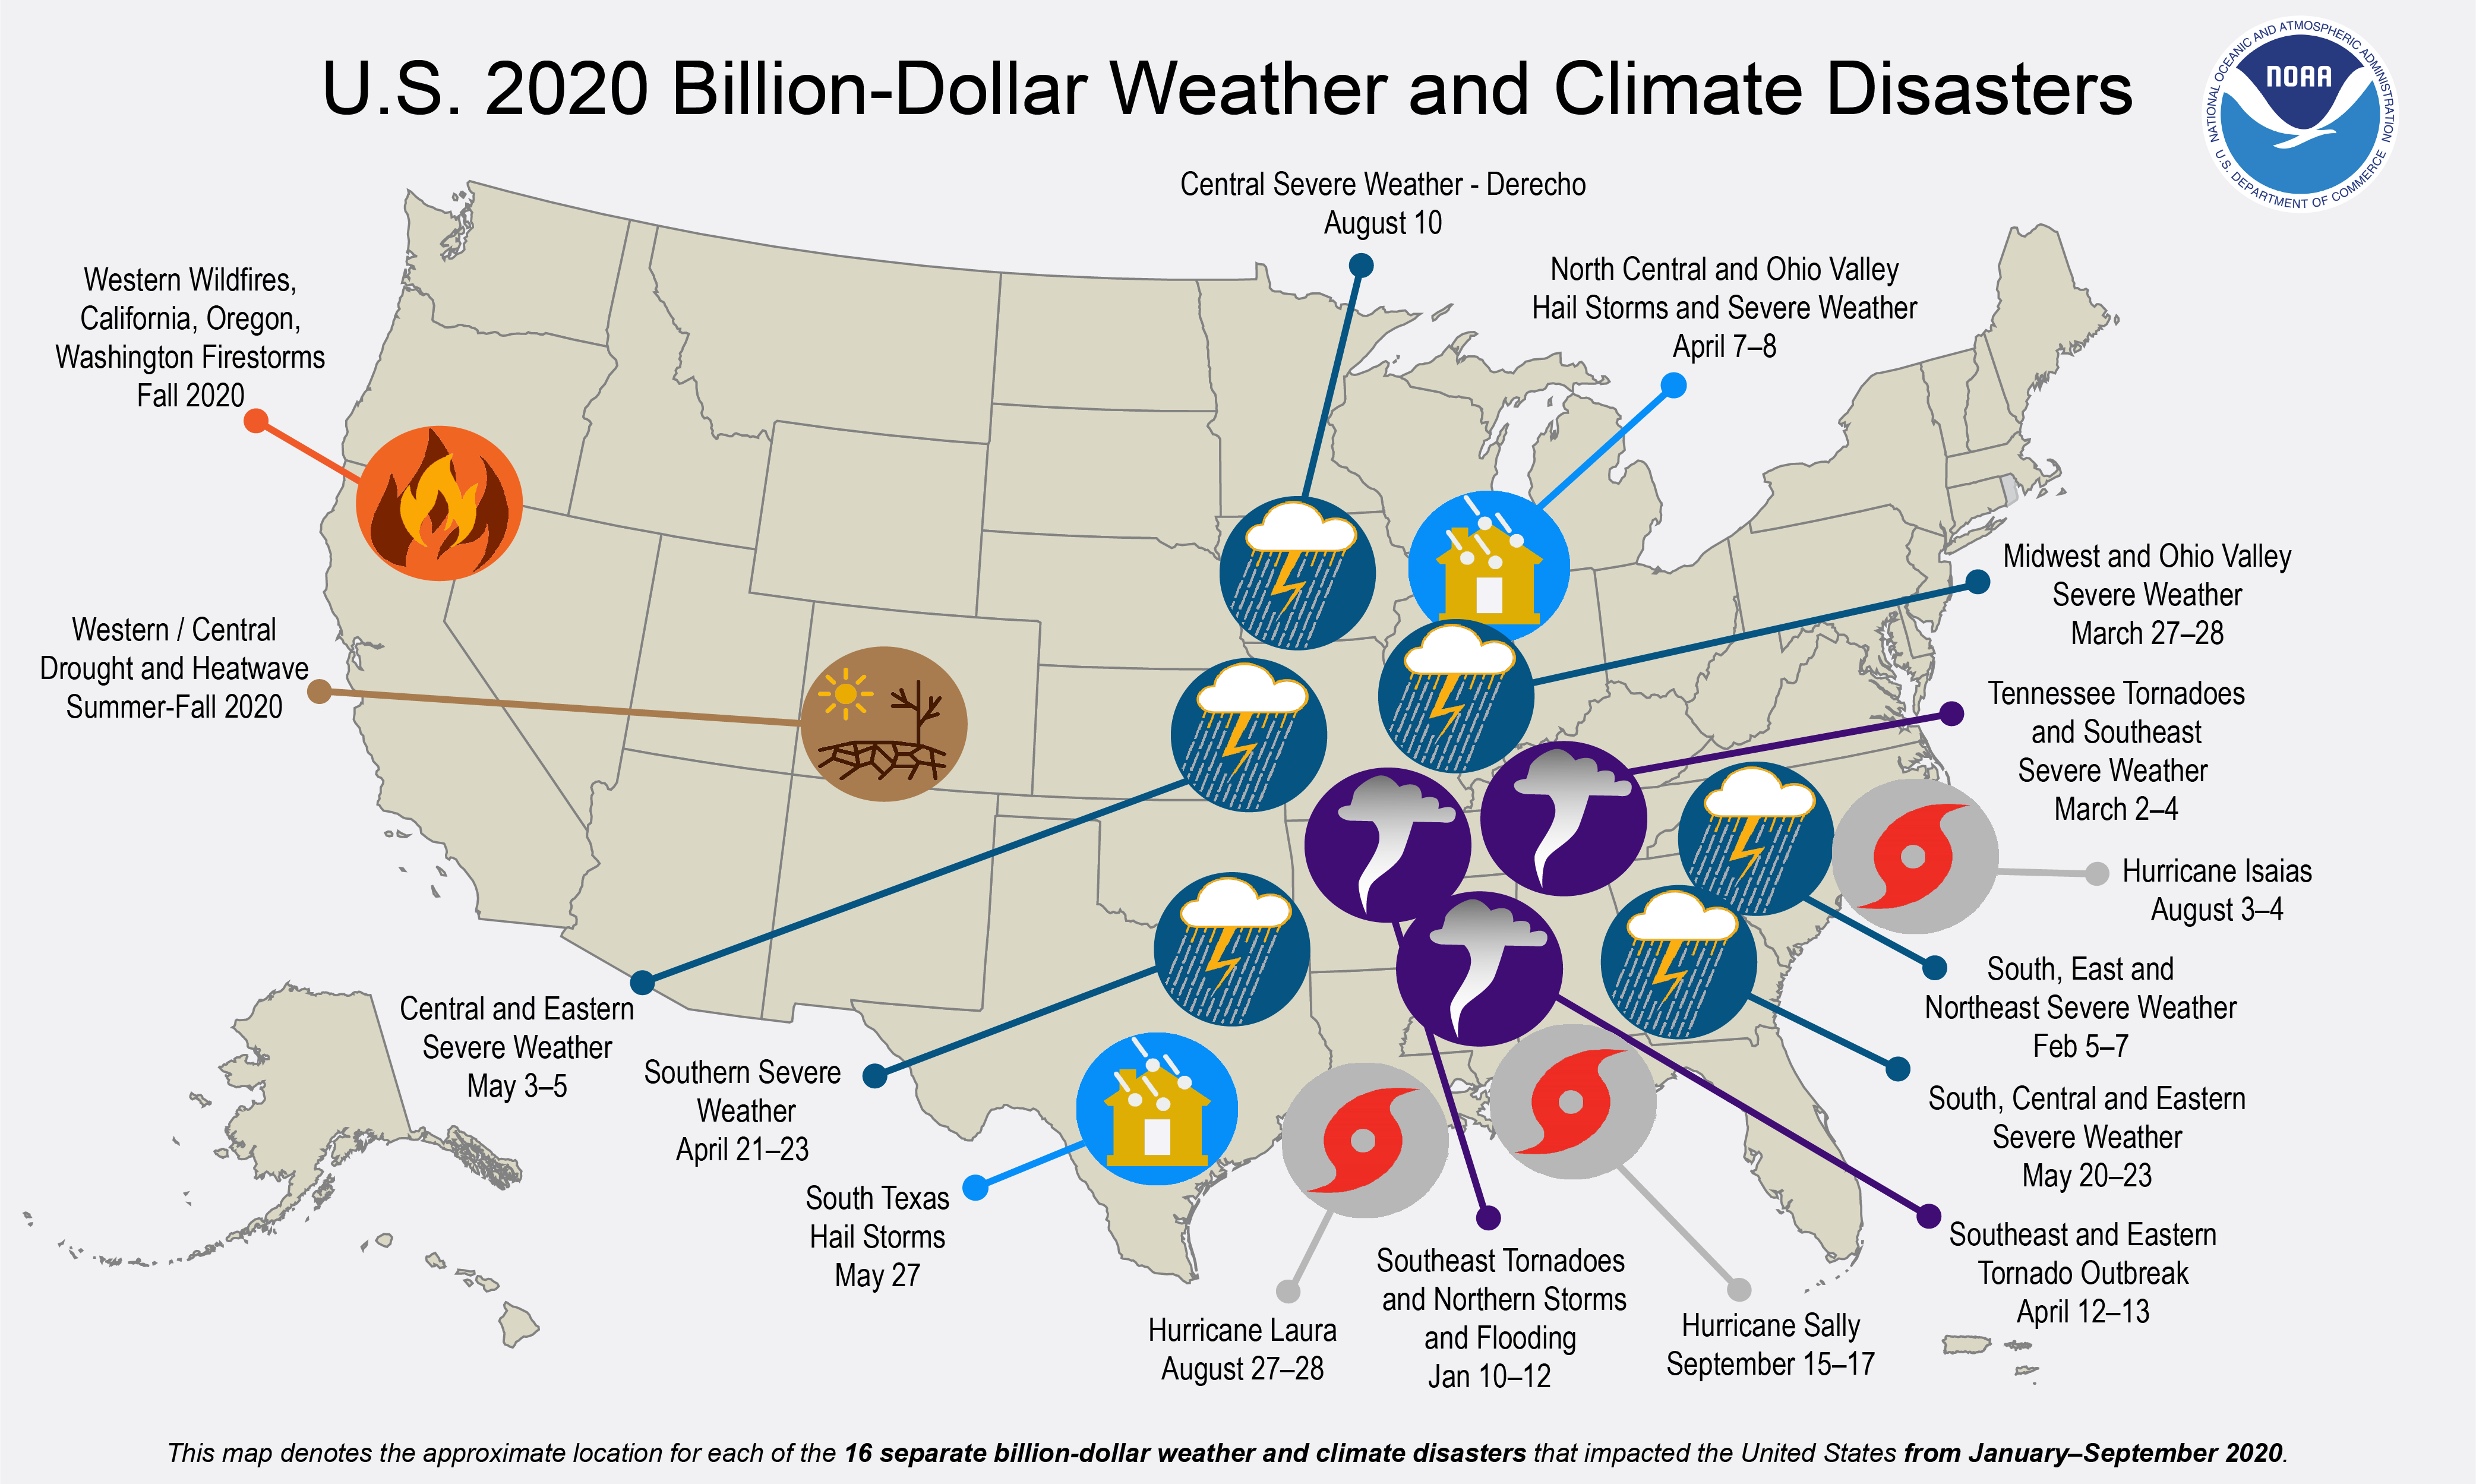 A map of the U.S. plotted with all the billion-dollar disasters experienced in 2020 to date. For more details, please see the webpage www.ncdc.noaa.gov/billions.